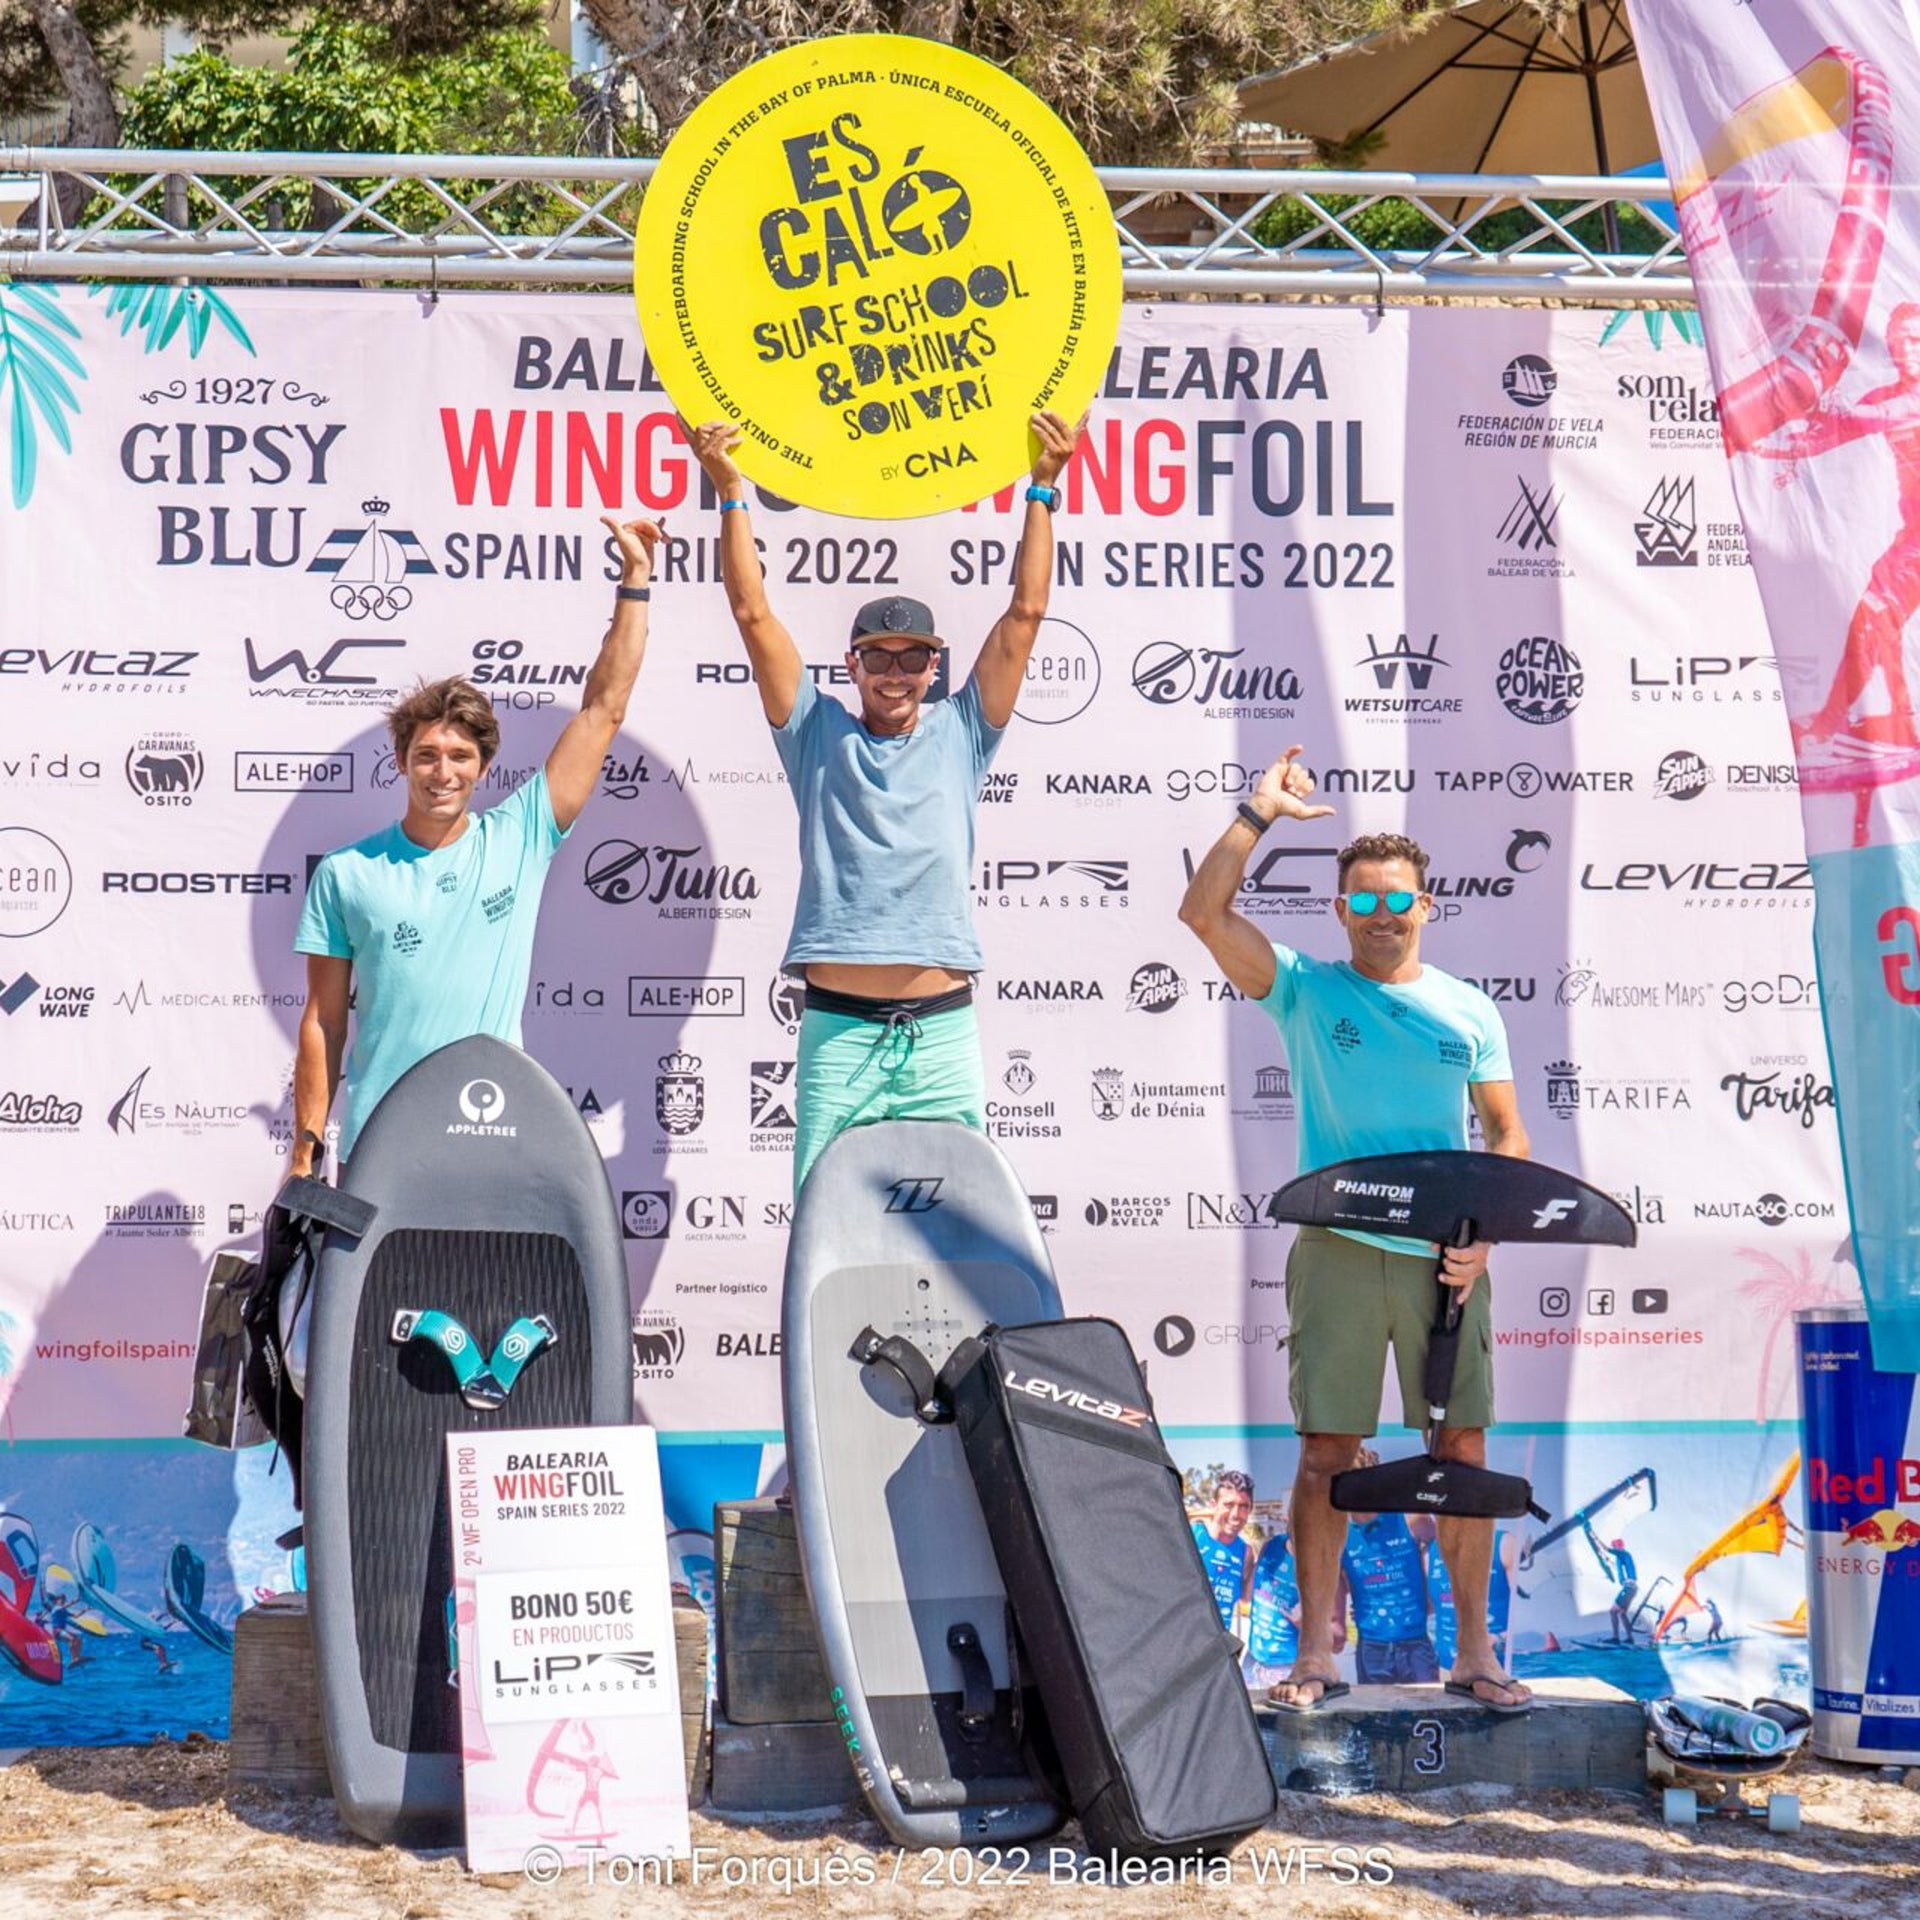 Gunnar ﻿Biniasch wins the fourth stop of the Spanish Wing Foil Cup